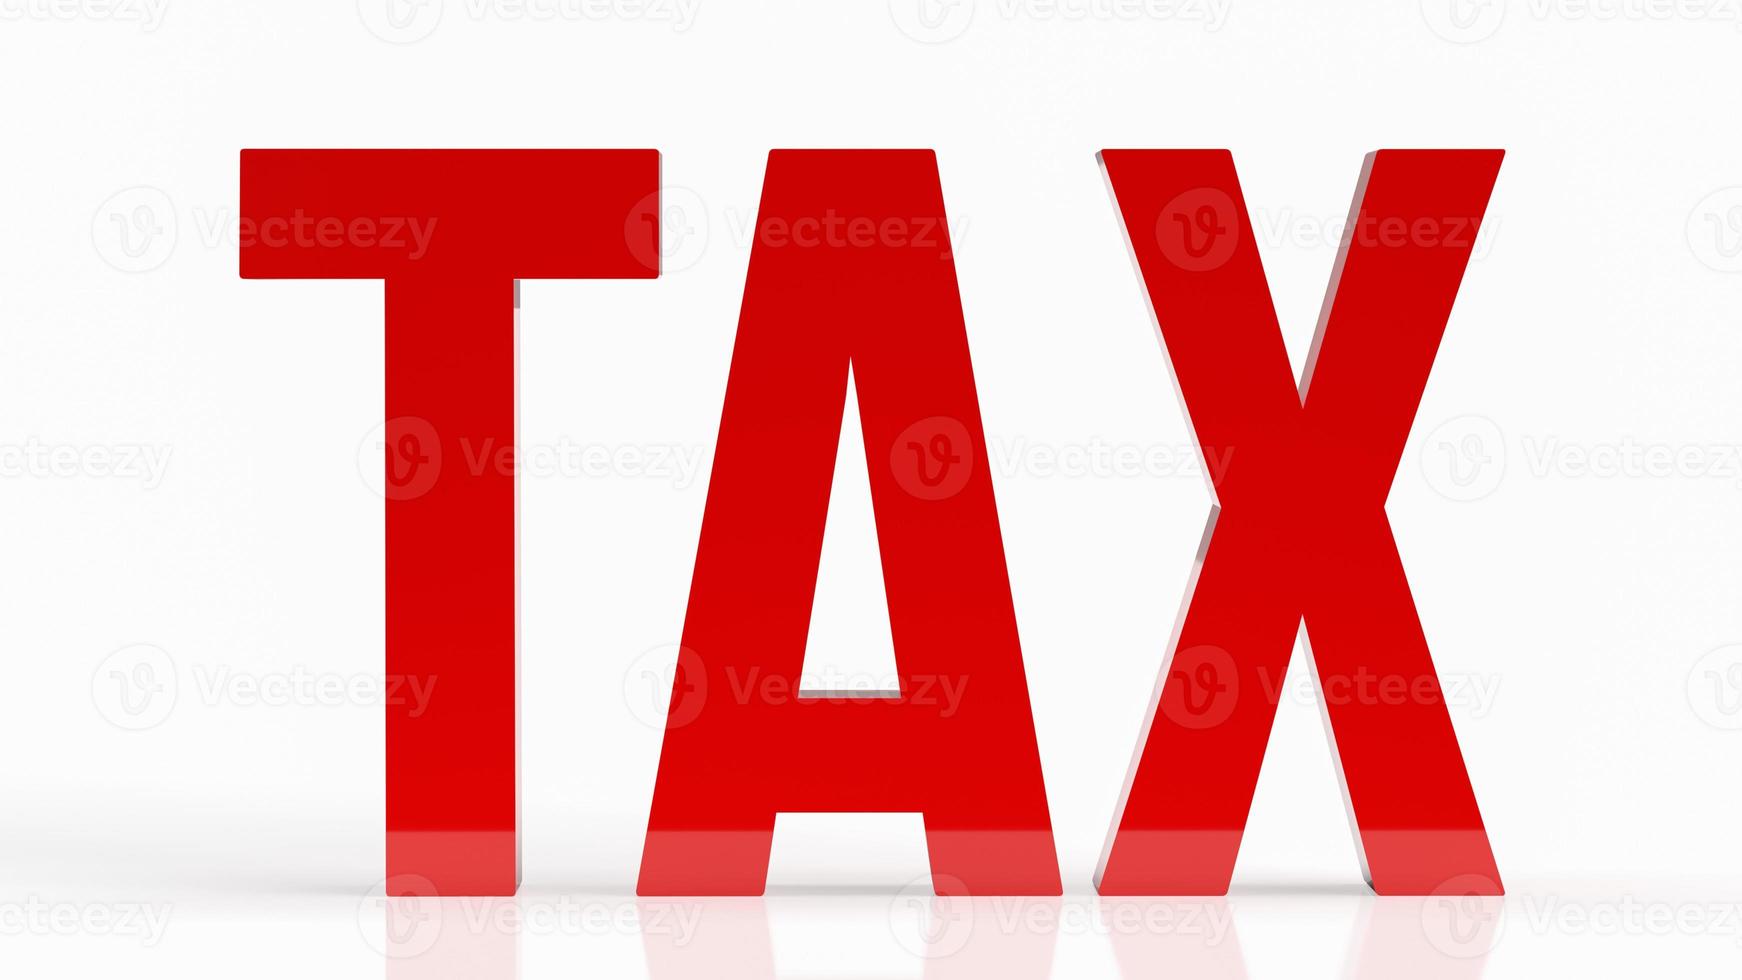 The red tax on white  background  for business concept 3d rendering photo